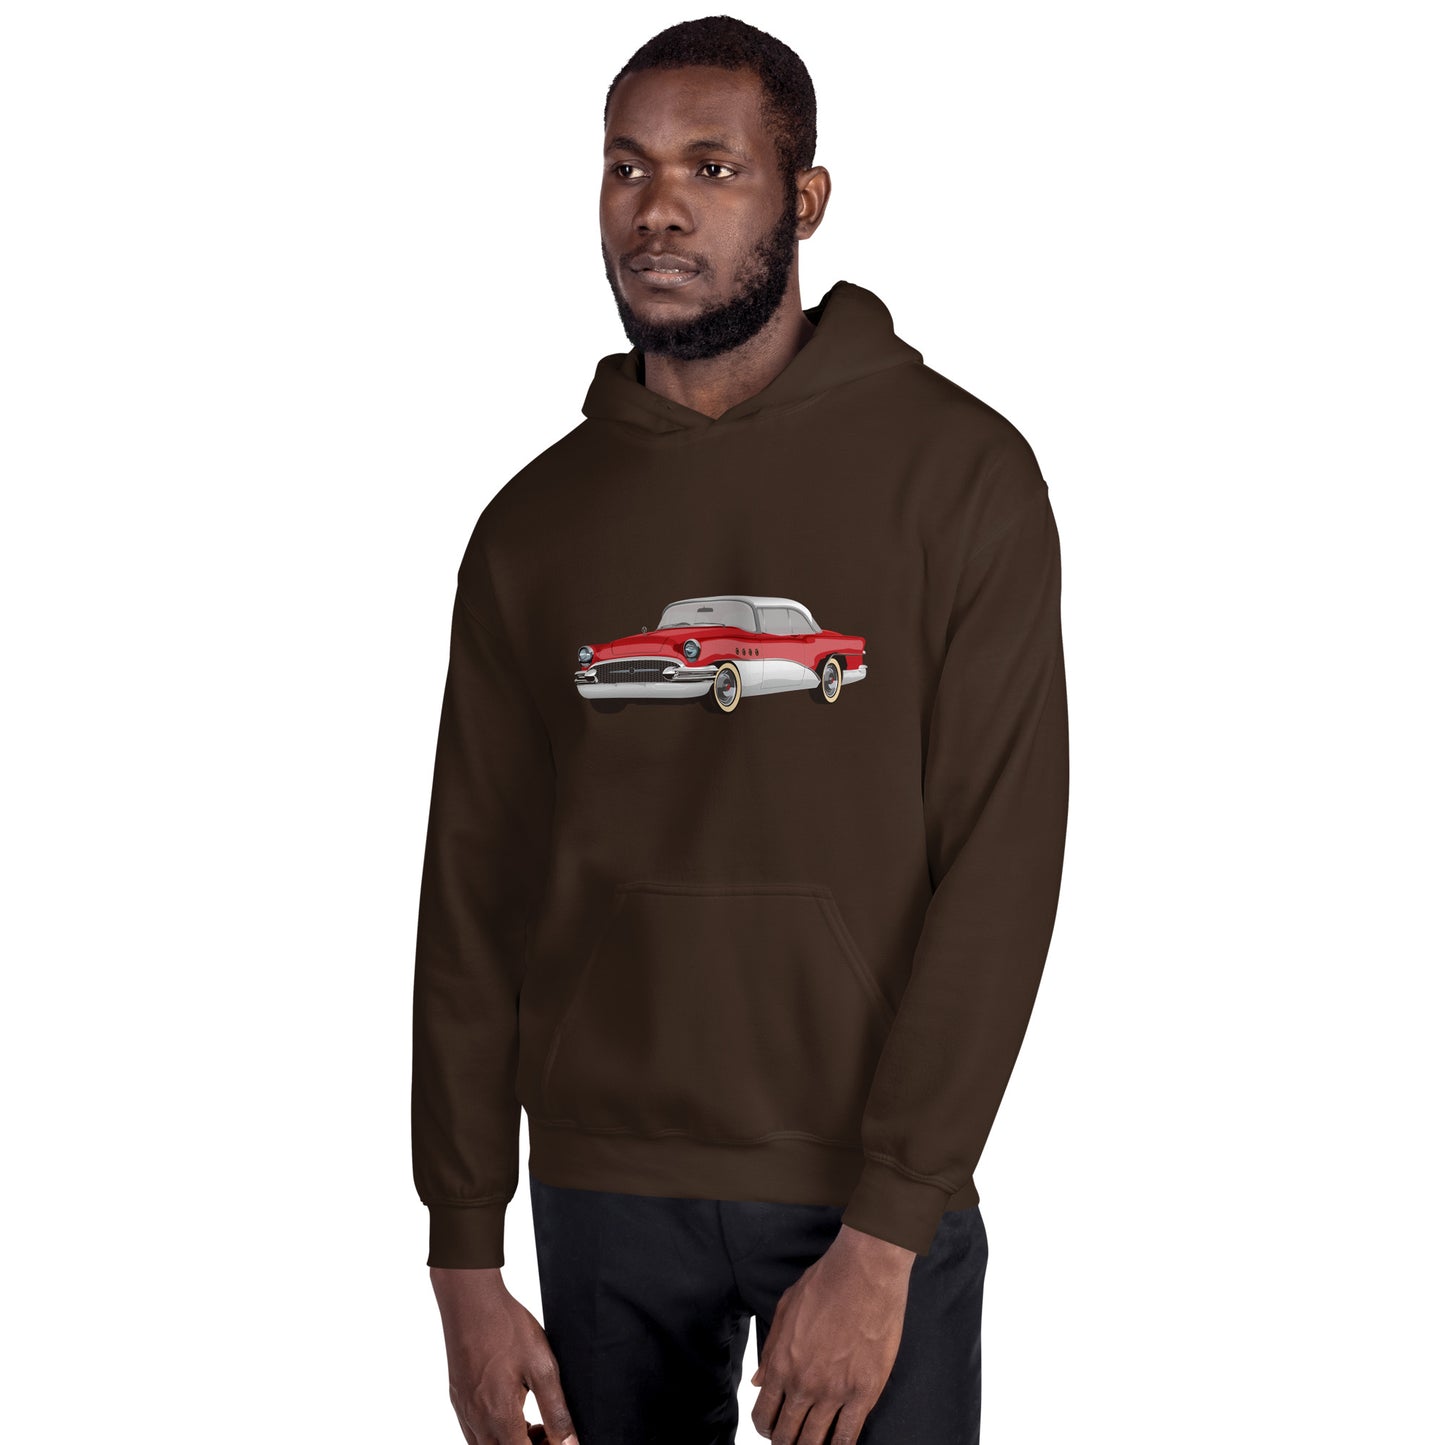 Man with dark chocolate hoodie with red chevrolet